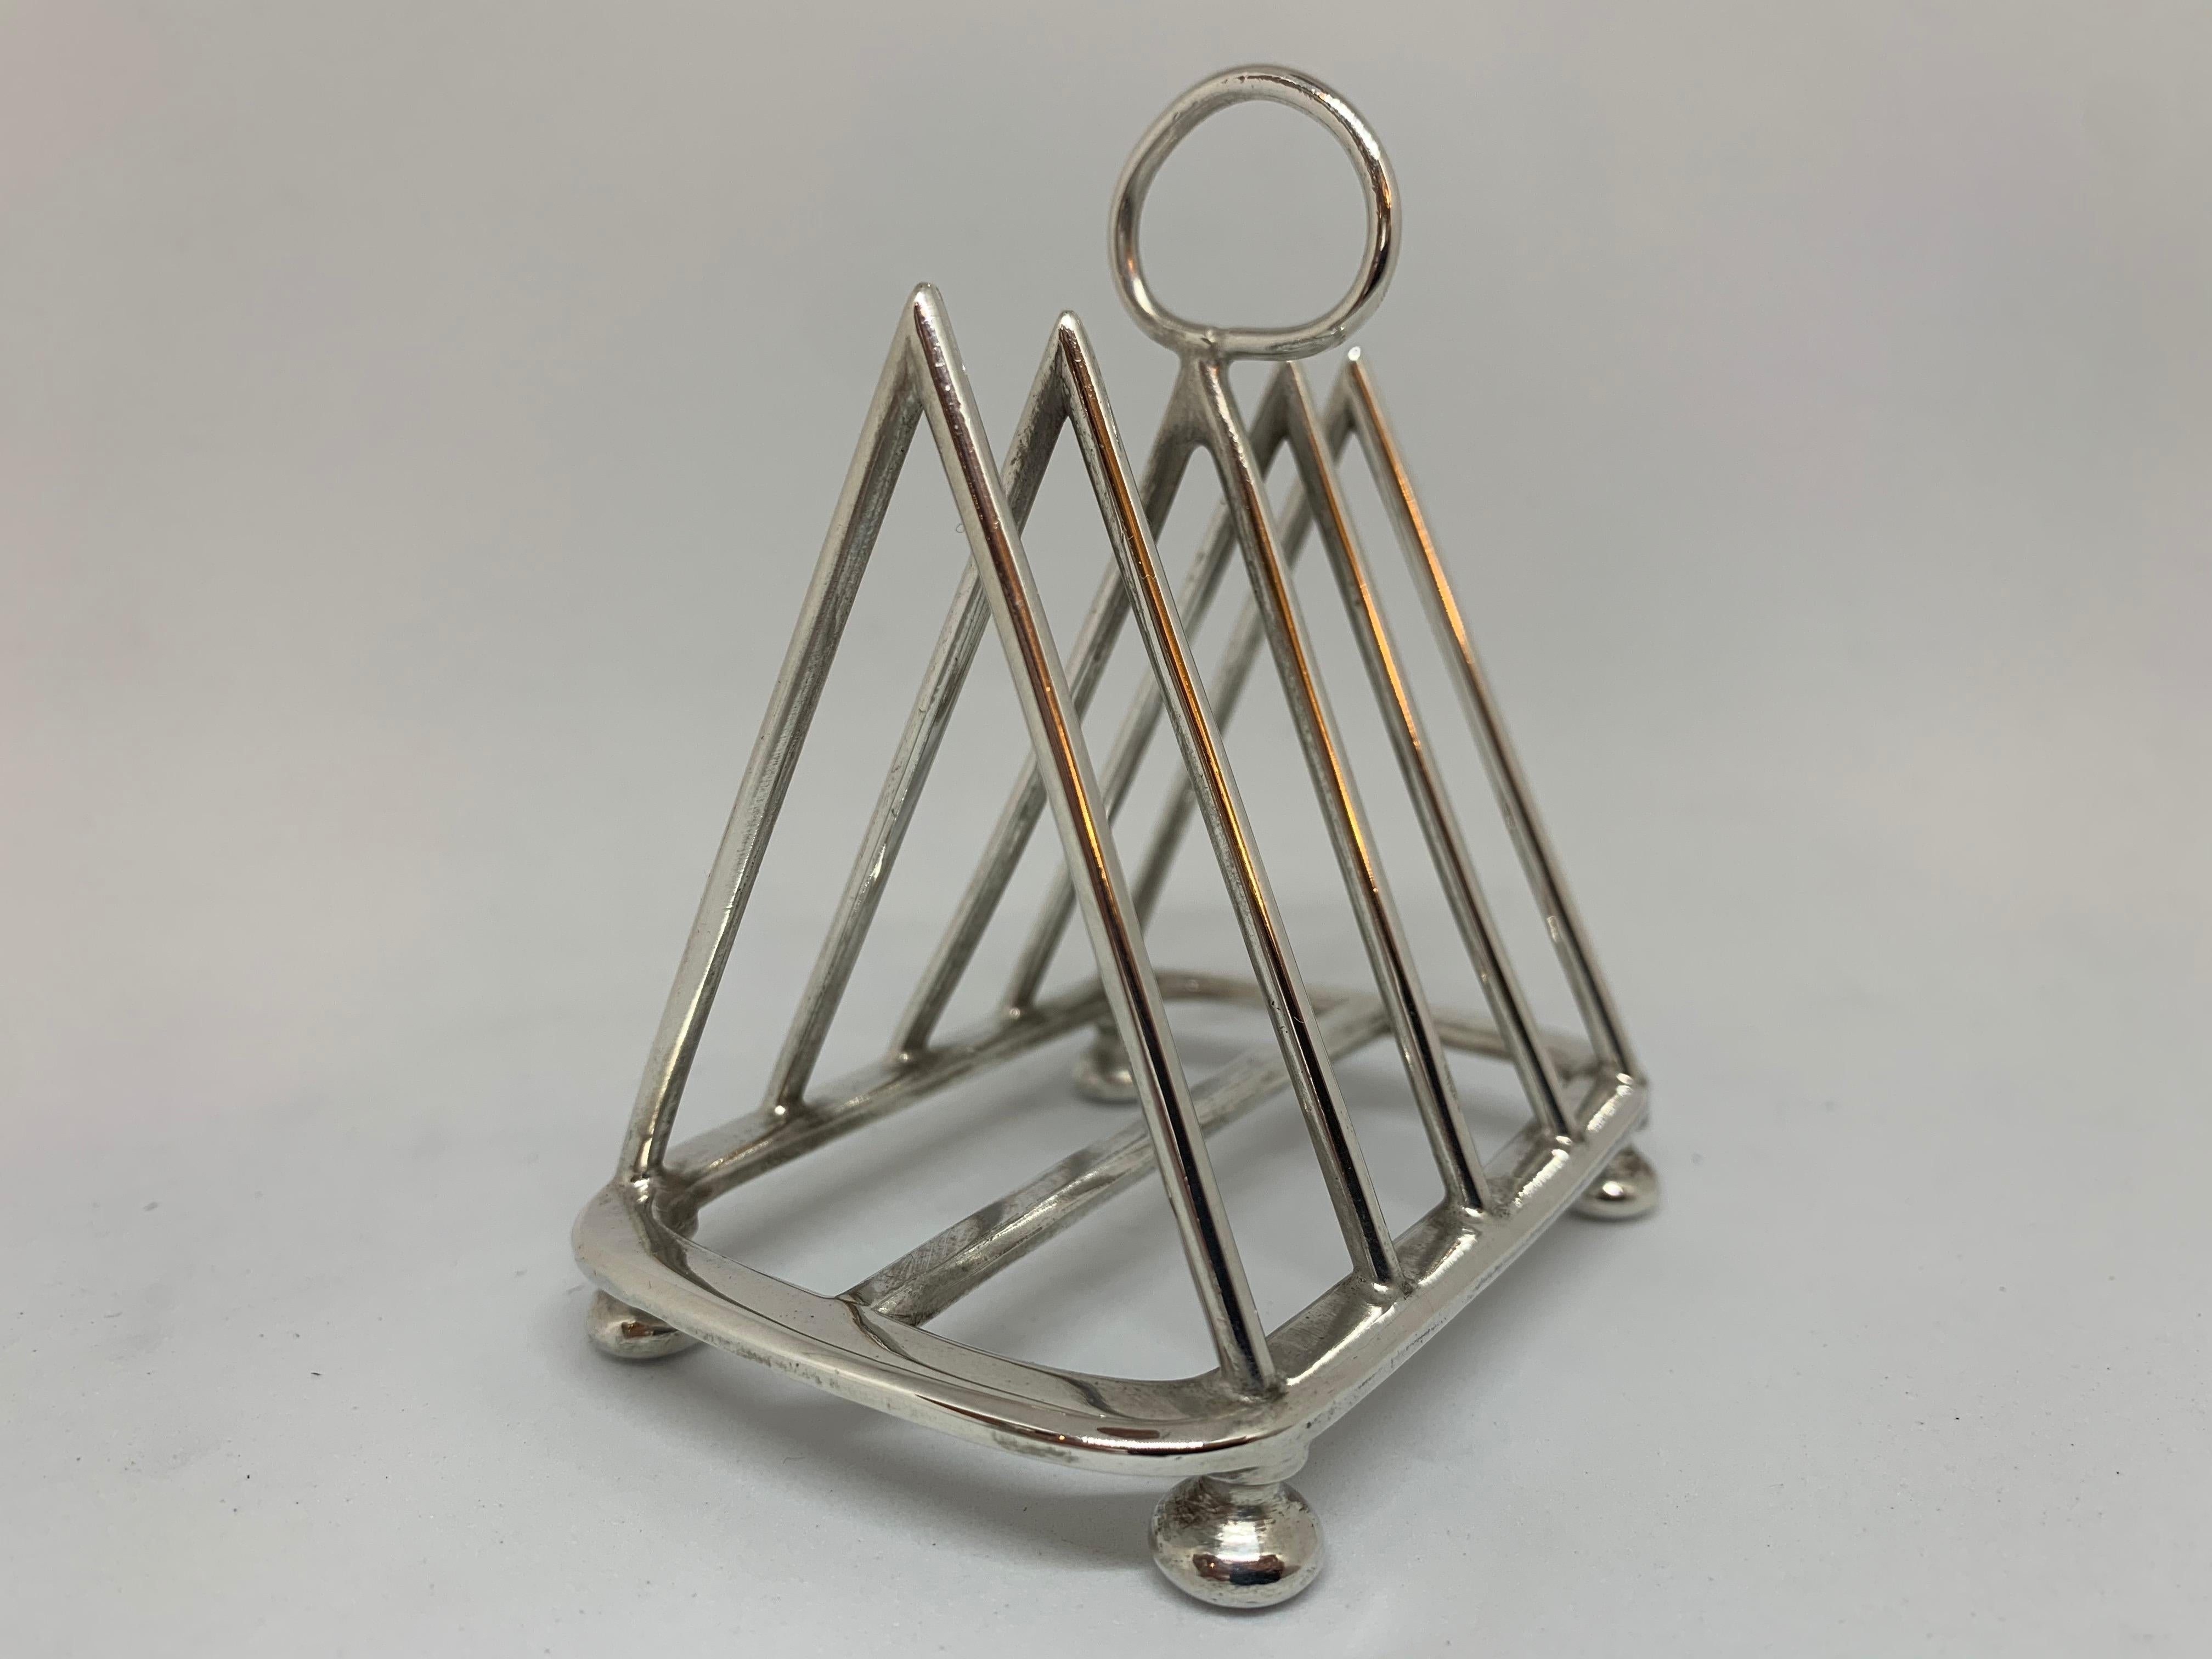 Late Victorian English Walker & Hall Silver Plate Toast Rack, Made in Sheffield, circa 1900